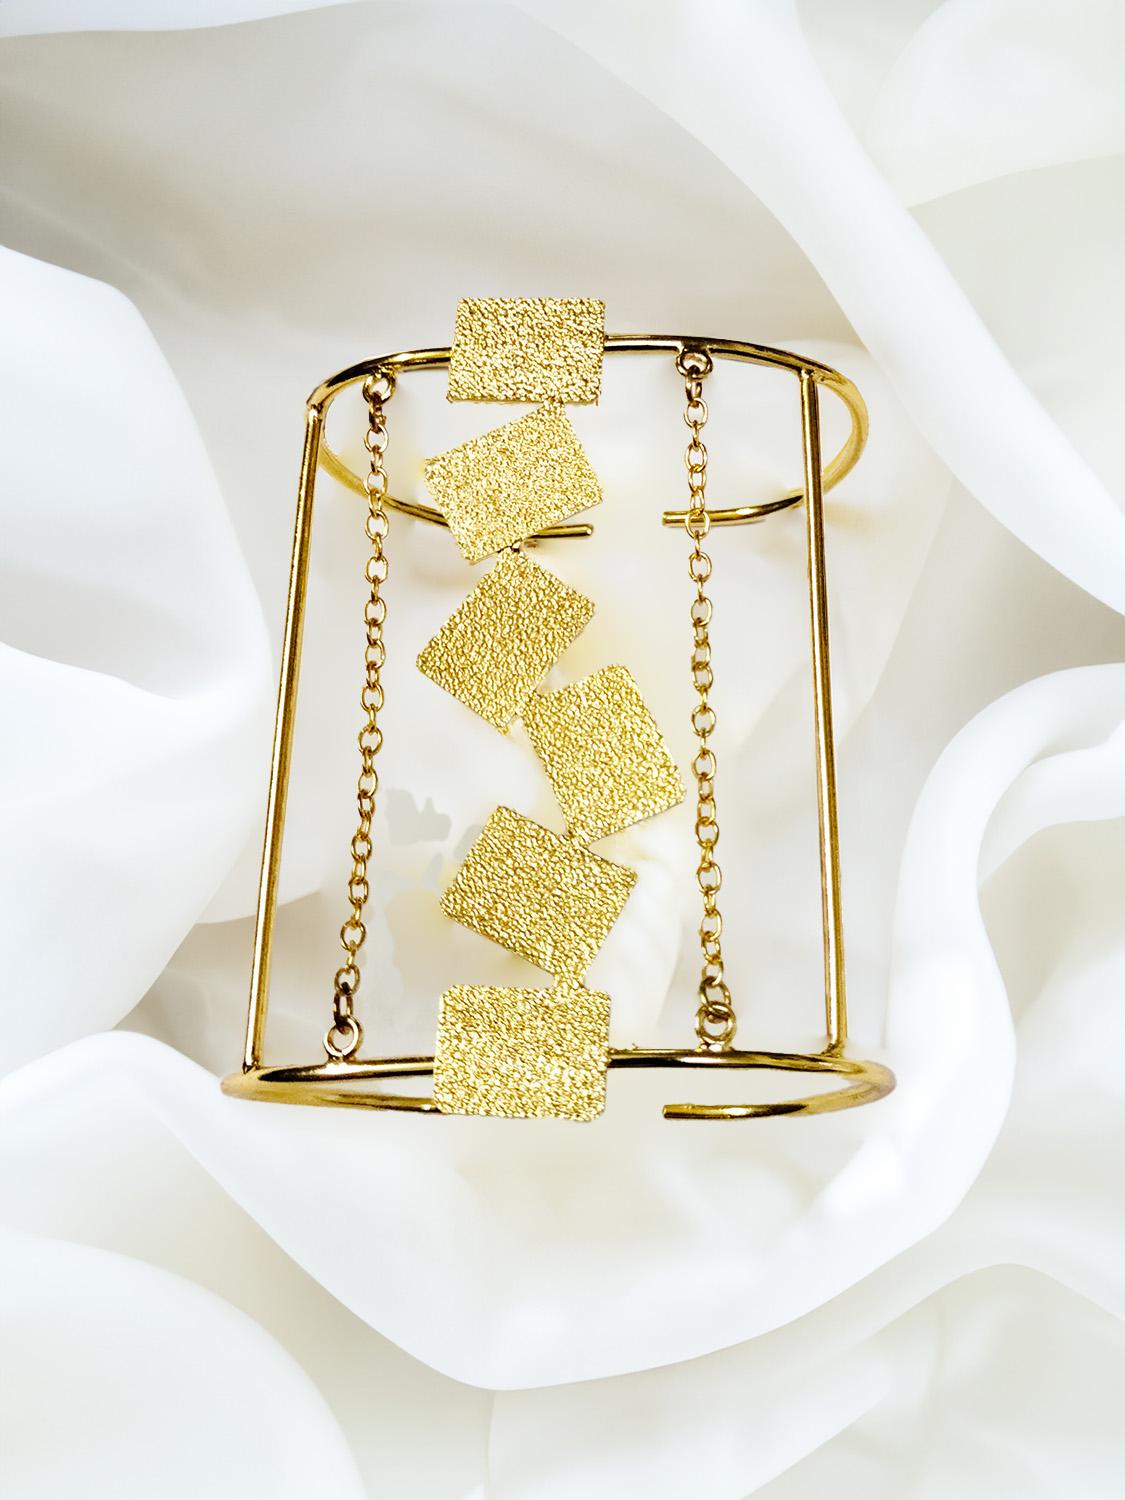 Gold-Plated Rectangle & Chain Cuffs Bracelet